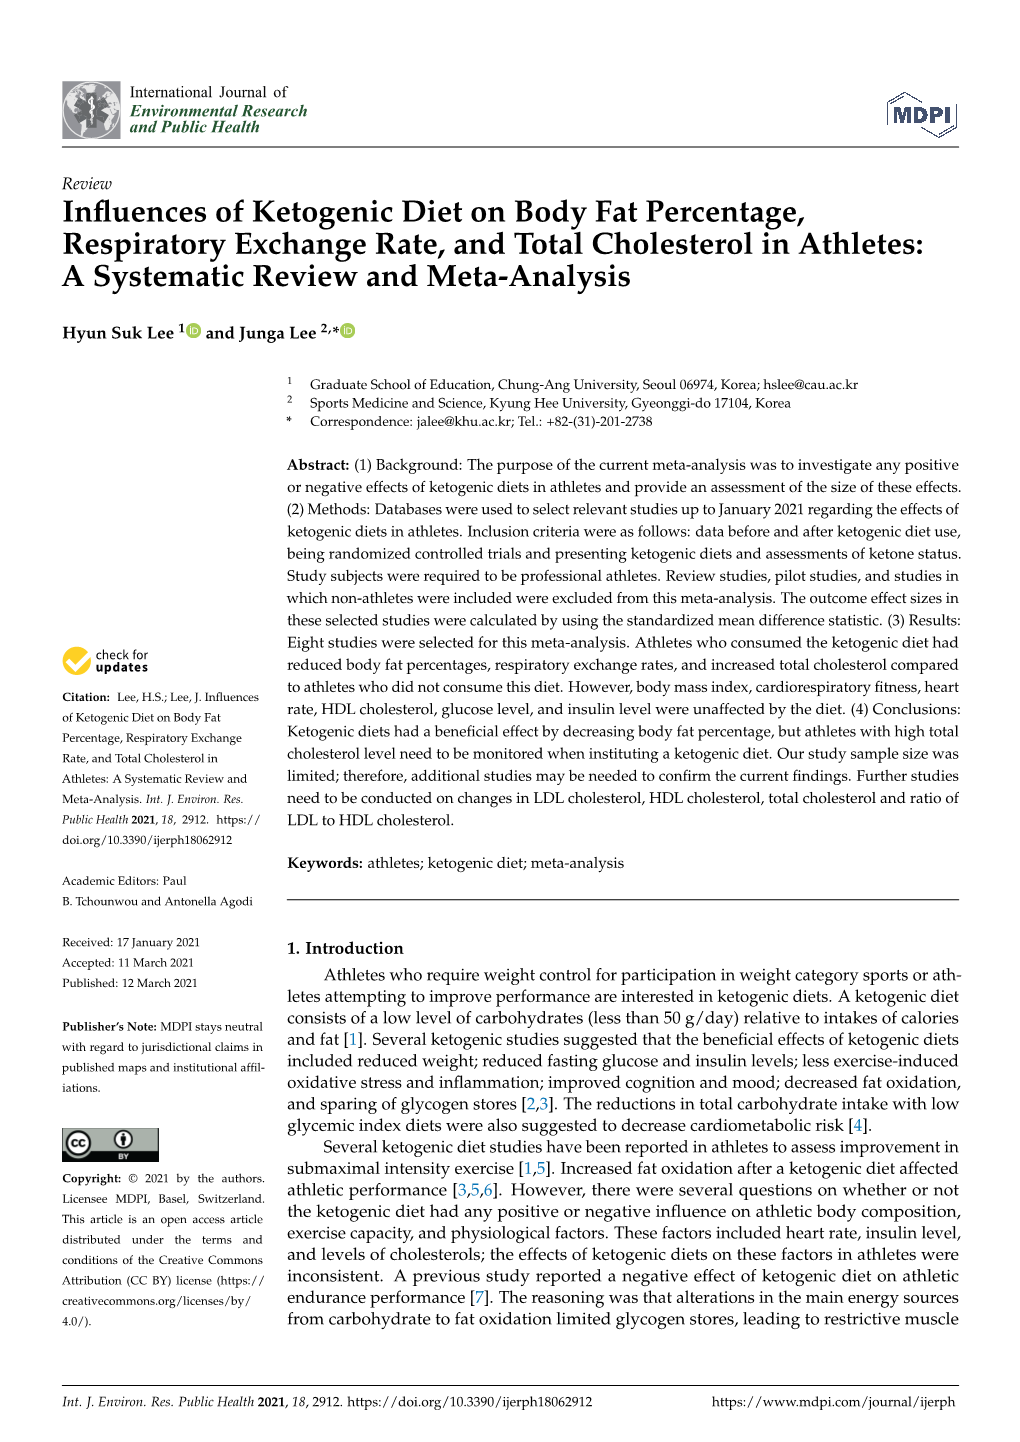 Influences of Ketogenic Diet on Body Fat Percentage, Respiratory Exchange Rate, and Total Cholesterol in Athletes